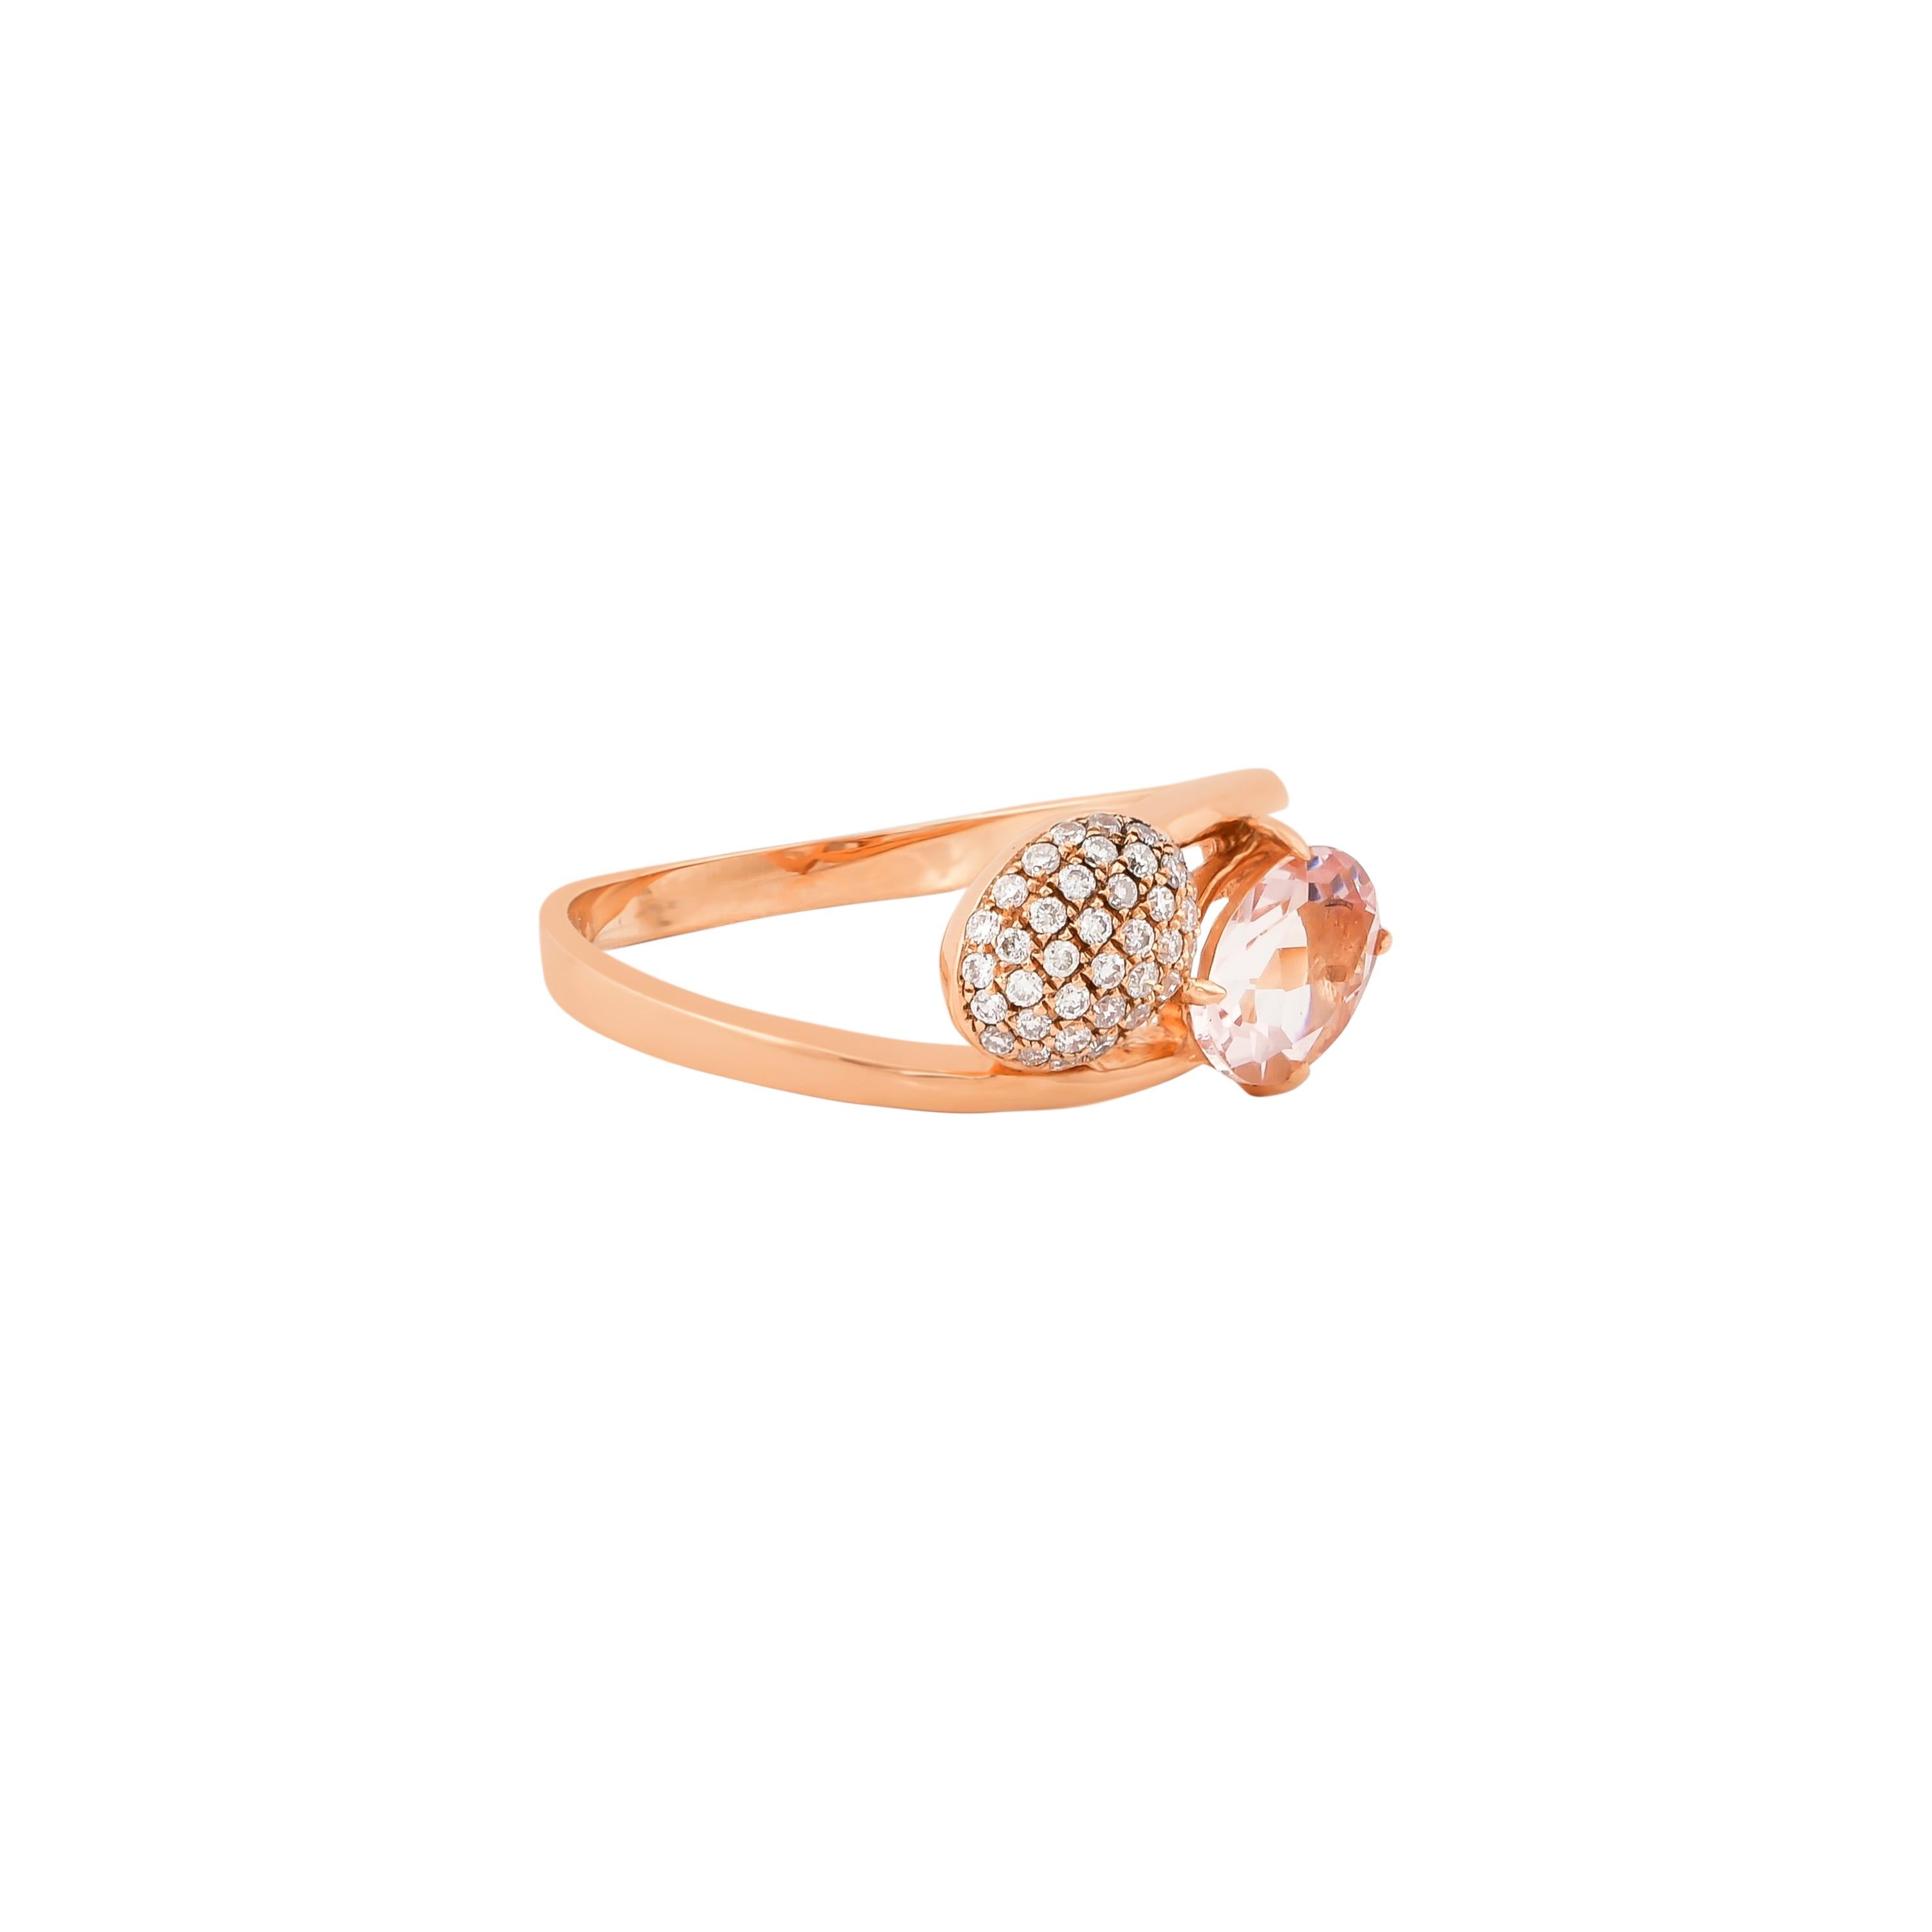 Oval Cut 0.8 Carat Morganite and Diamond Ring in 18 Karat Rose Gold For Sale